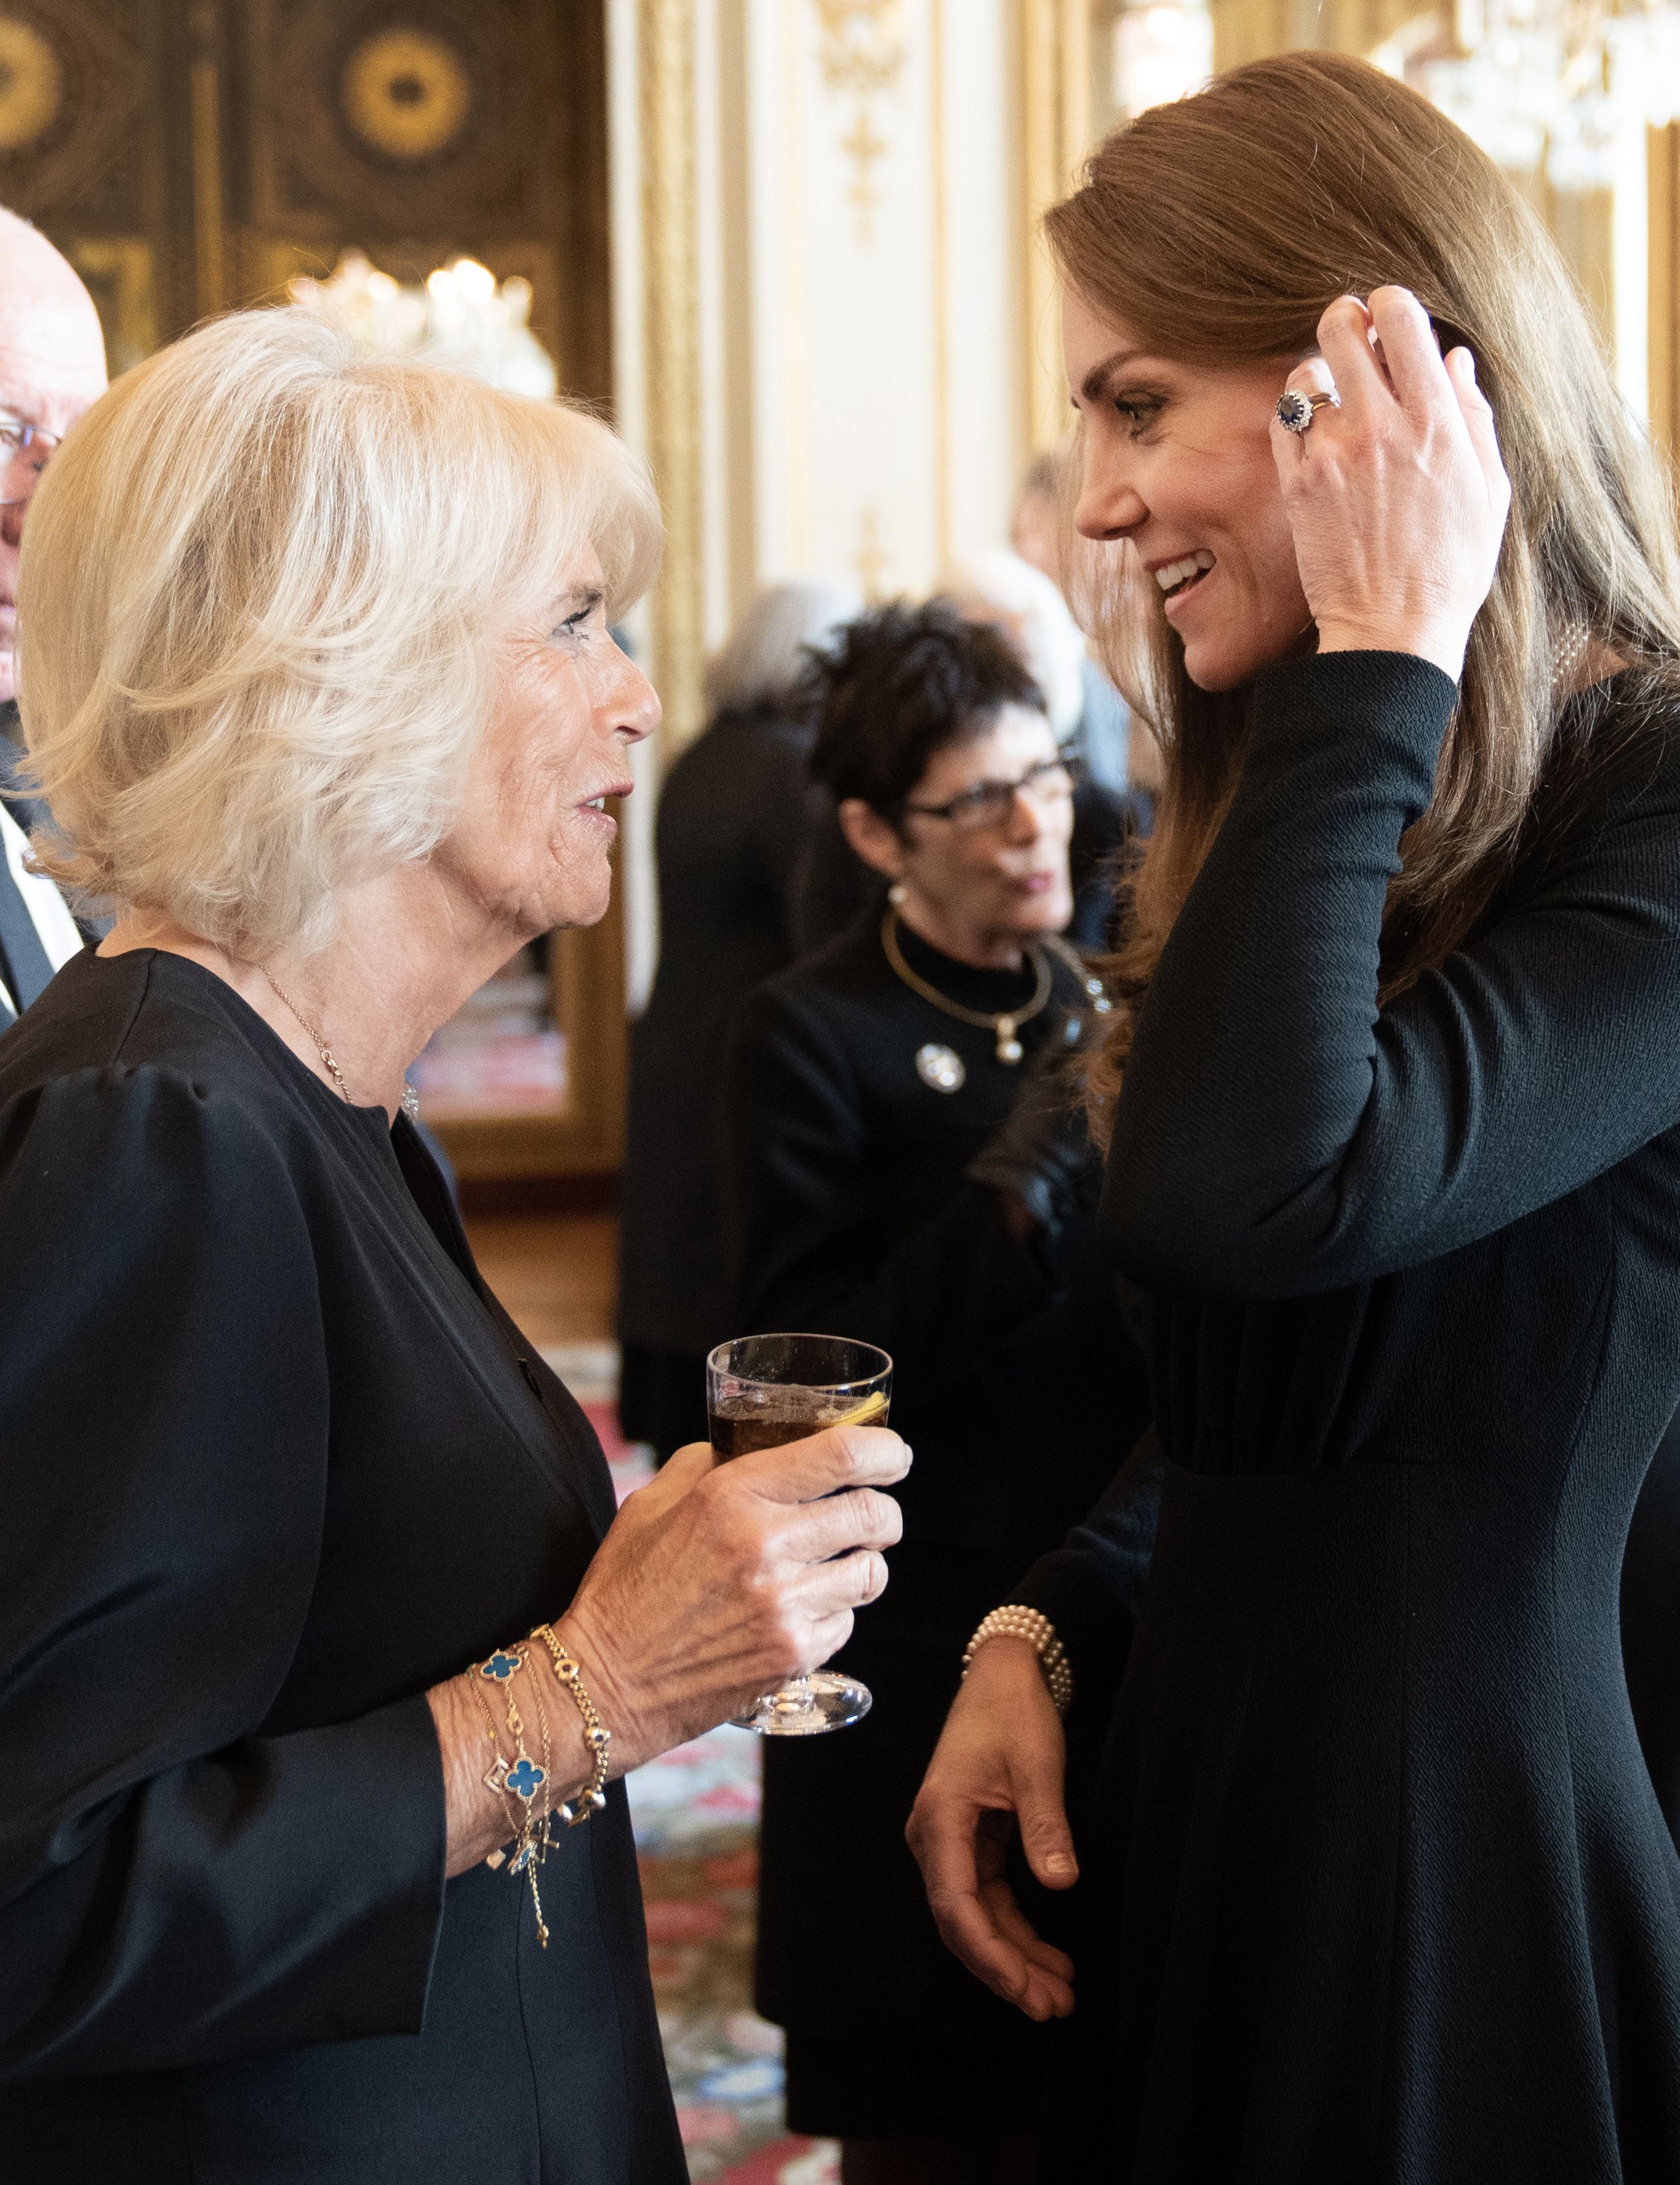 <p>Camilla, Queen Consort and daughter-in-law Princess Kate chatted during a lunch King Charles III held for governors-general of the Commonwealth nations at Buckingham Palace in London on Sept. 17, 2022, two days ahead of Queen Elizabeth II's funeral.</p>